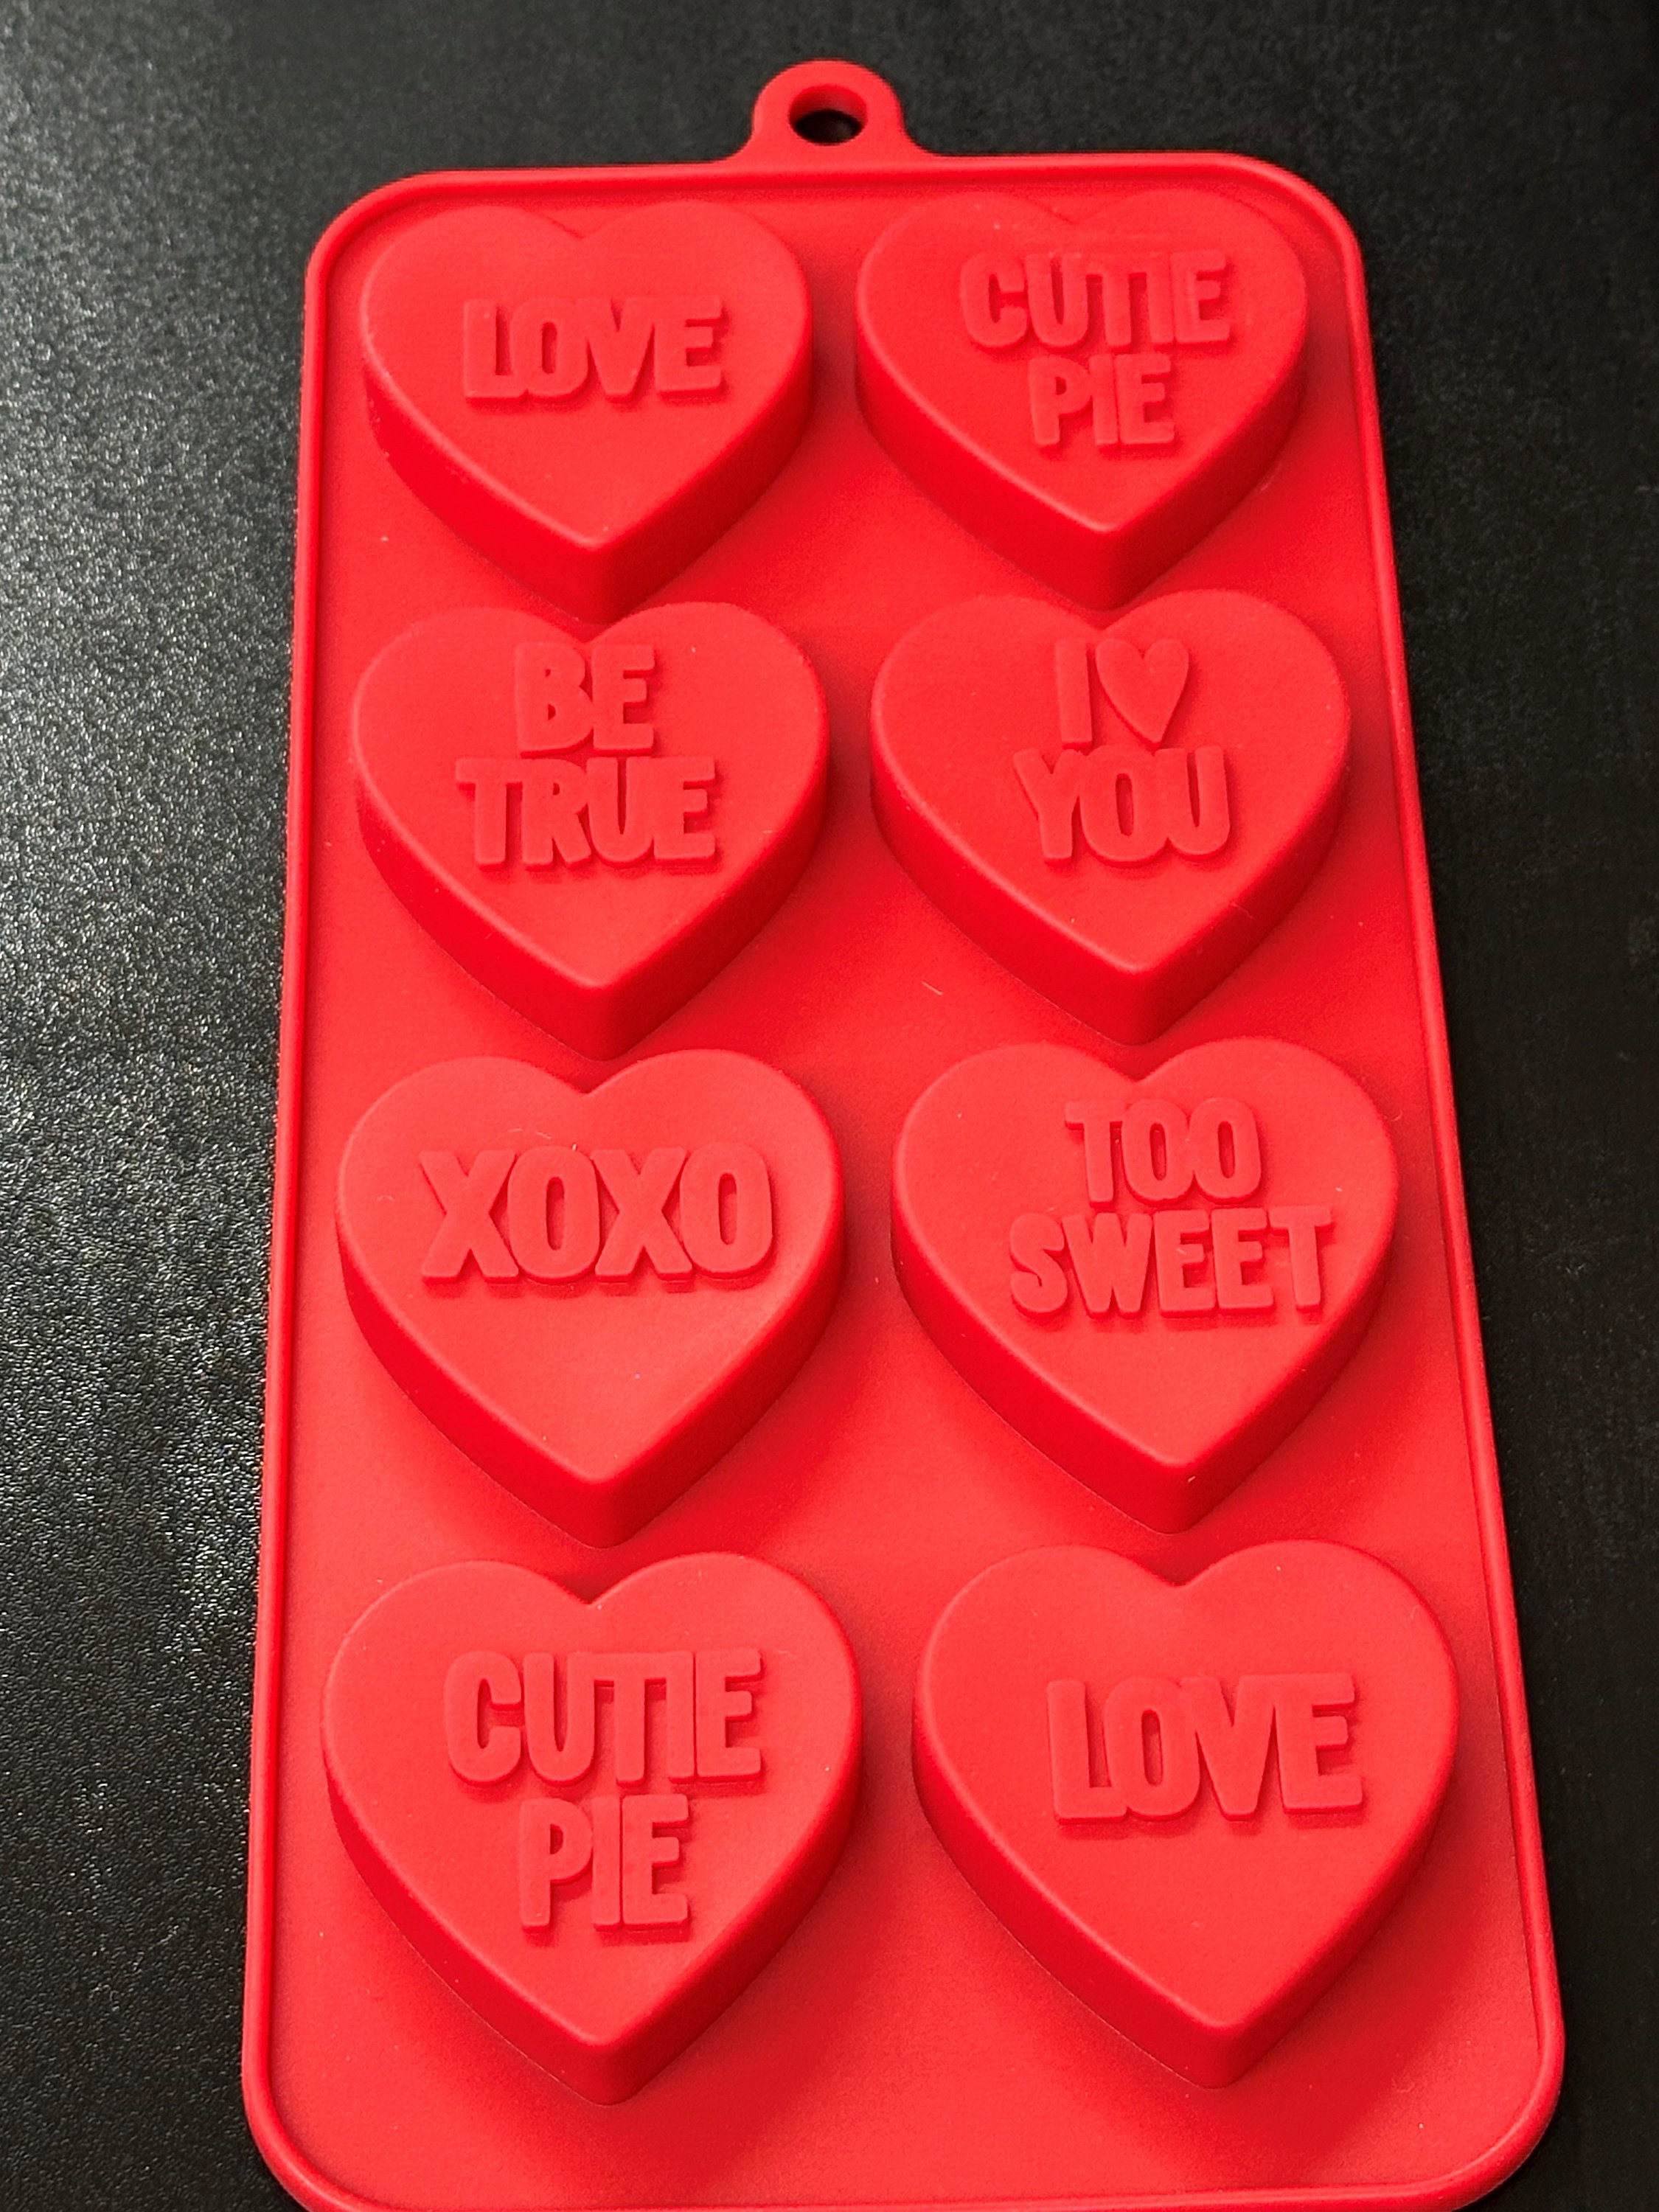 Conversation Hearts Silicone Mold SHINY Baking Candy Craft Resin Decoden  Art Brand New Valentine's Day -  Australia